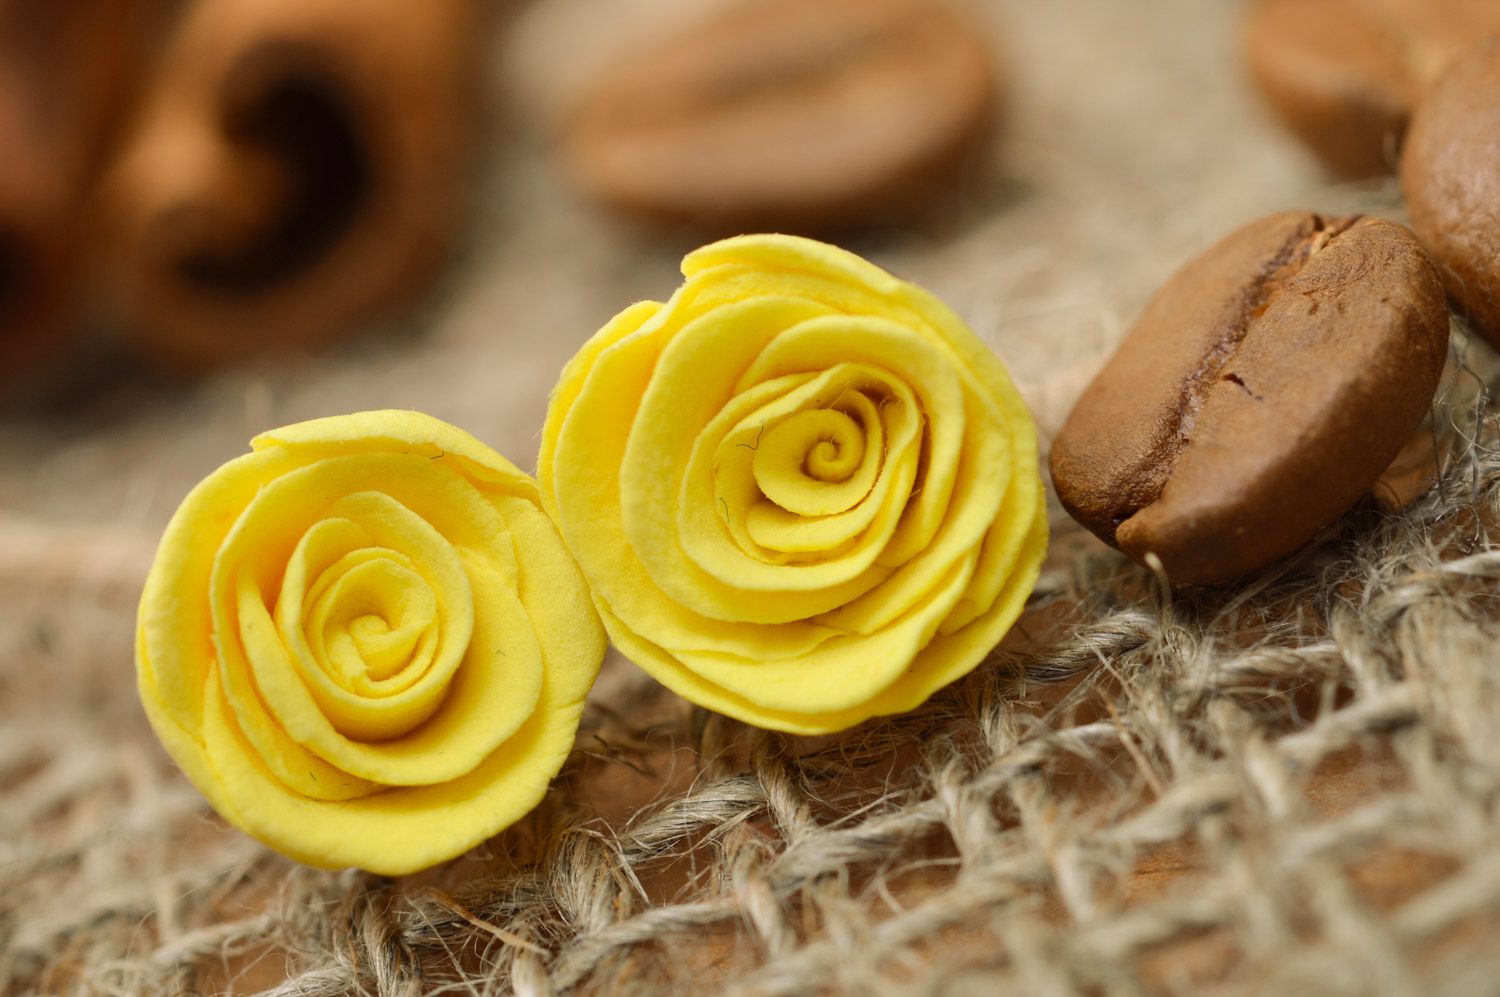 Handmade polymer clay flower stud earrings in the shape of yellow roses photo 1